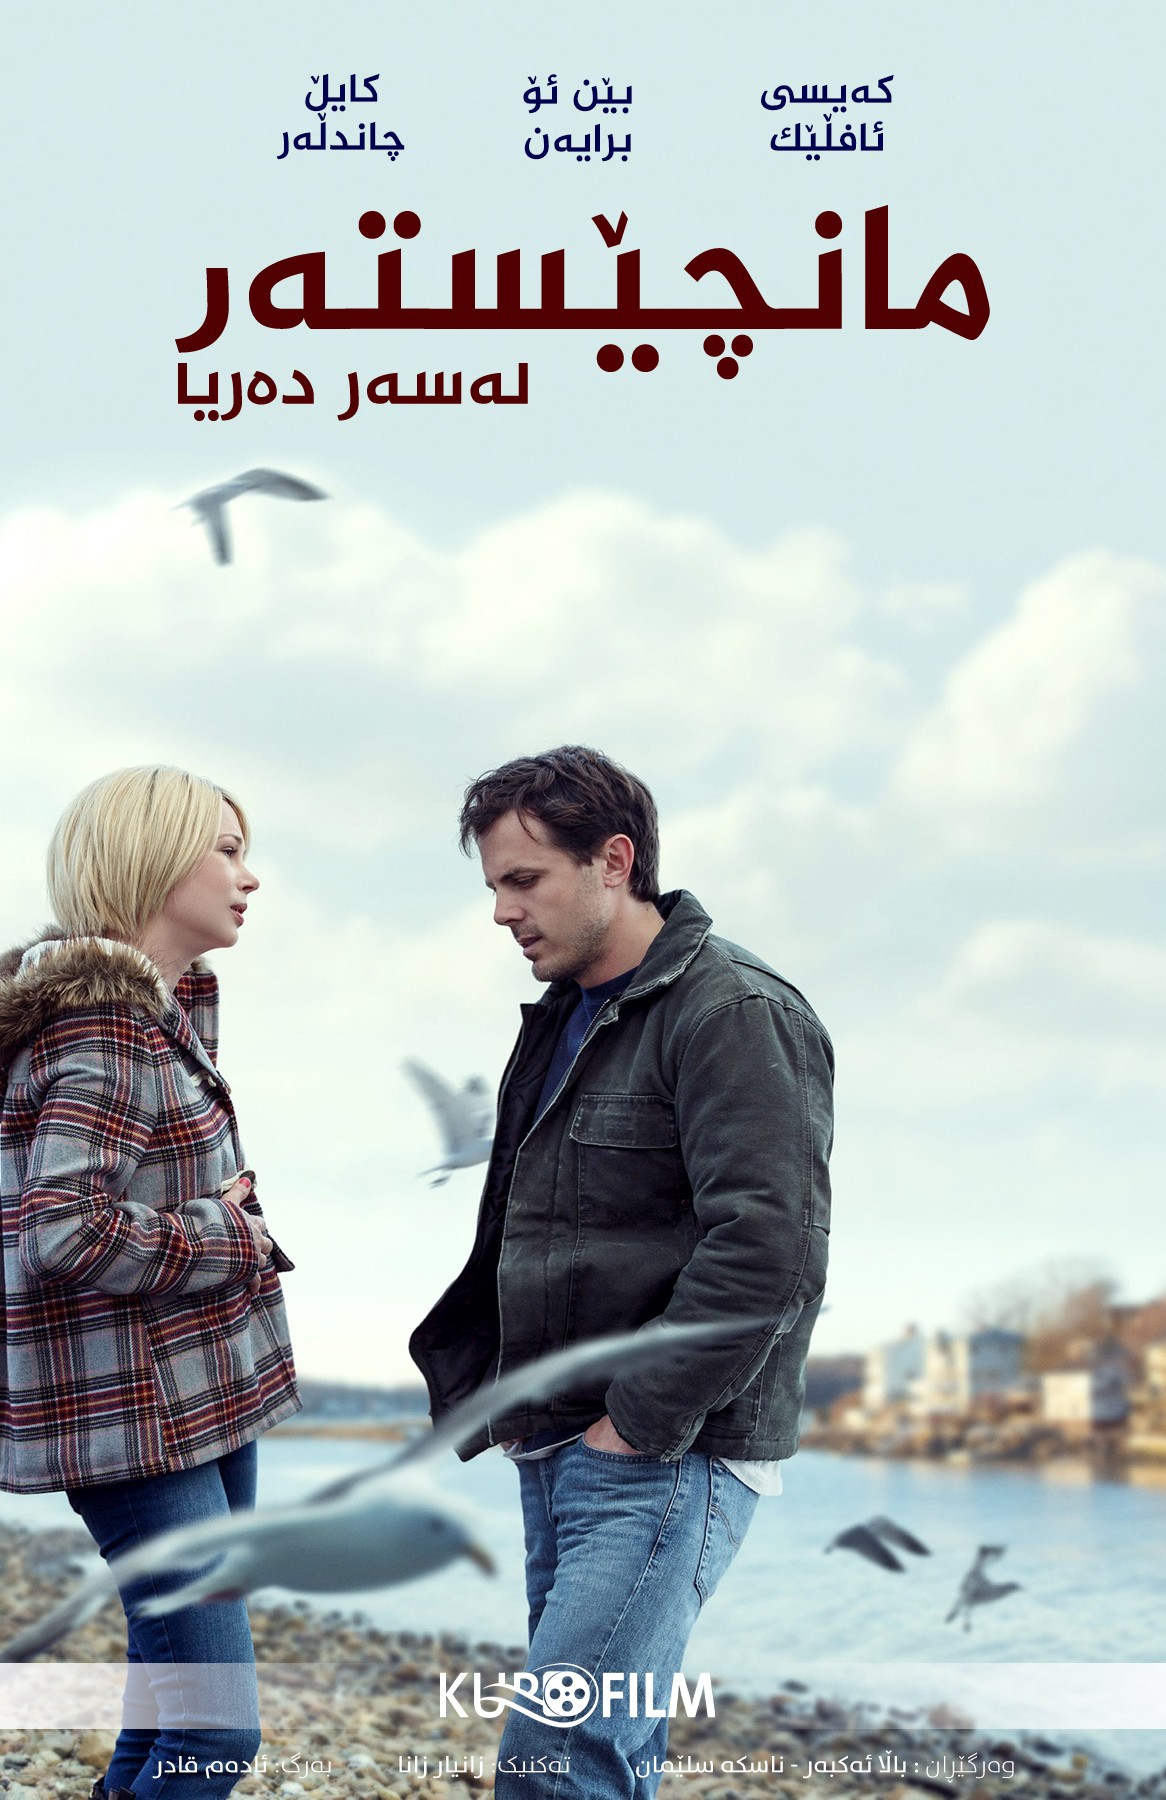 Manchester By The Sea (2016)